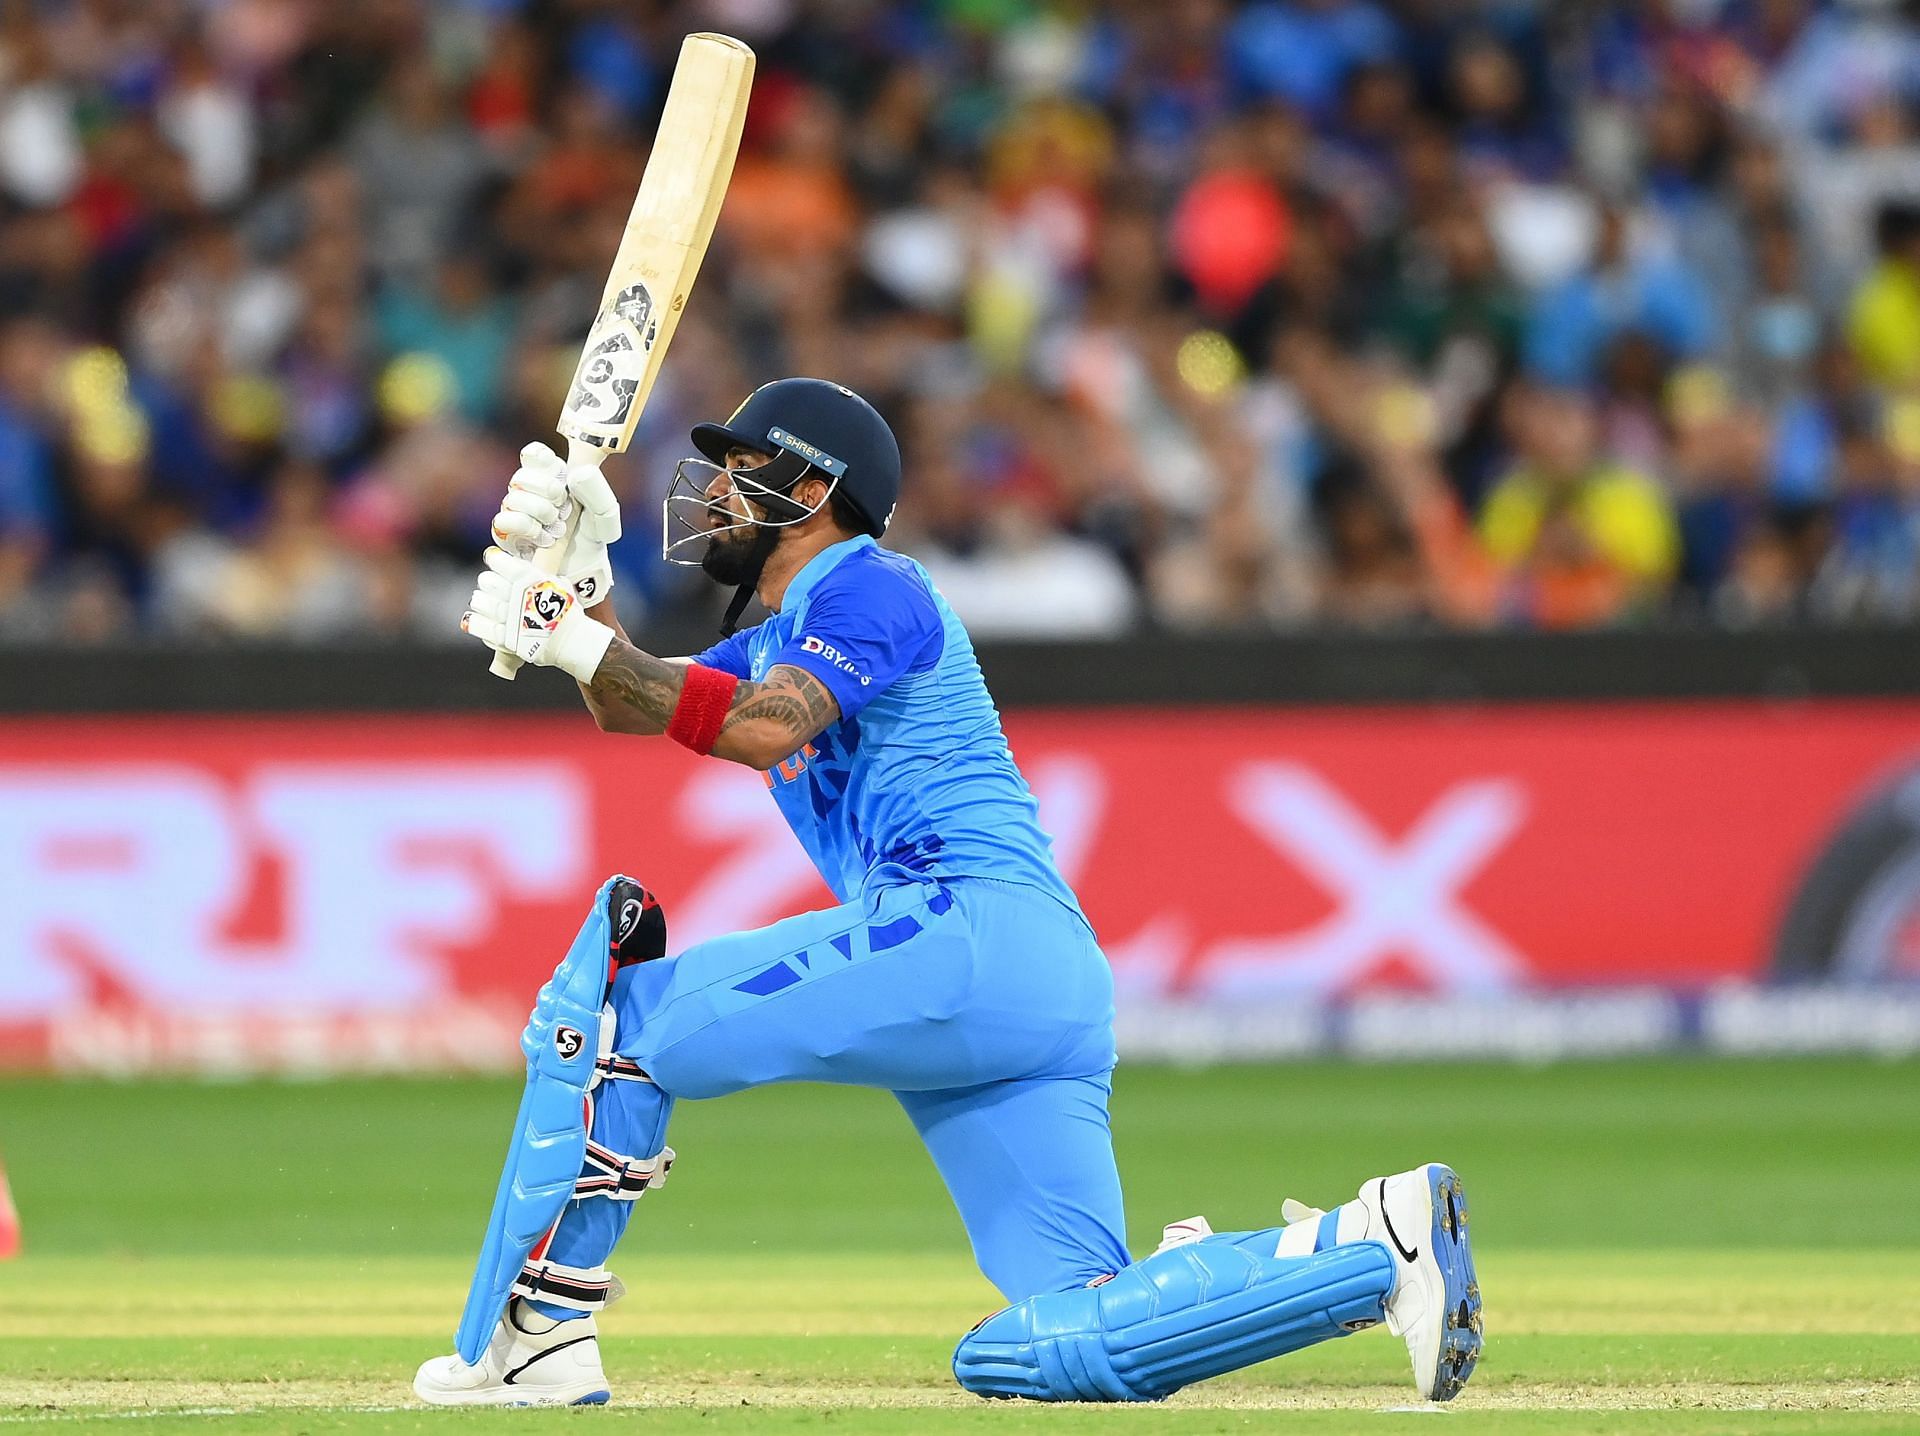 KL Rahul scored his second consecutive fifty in the tournament.